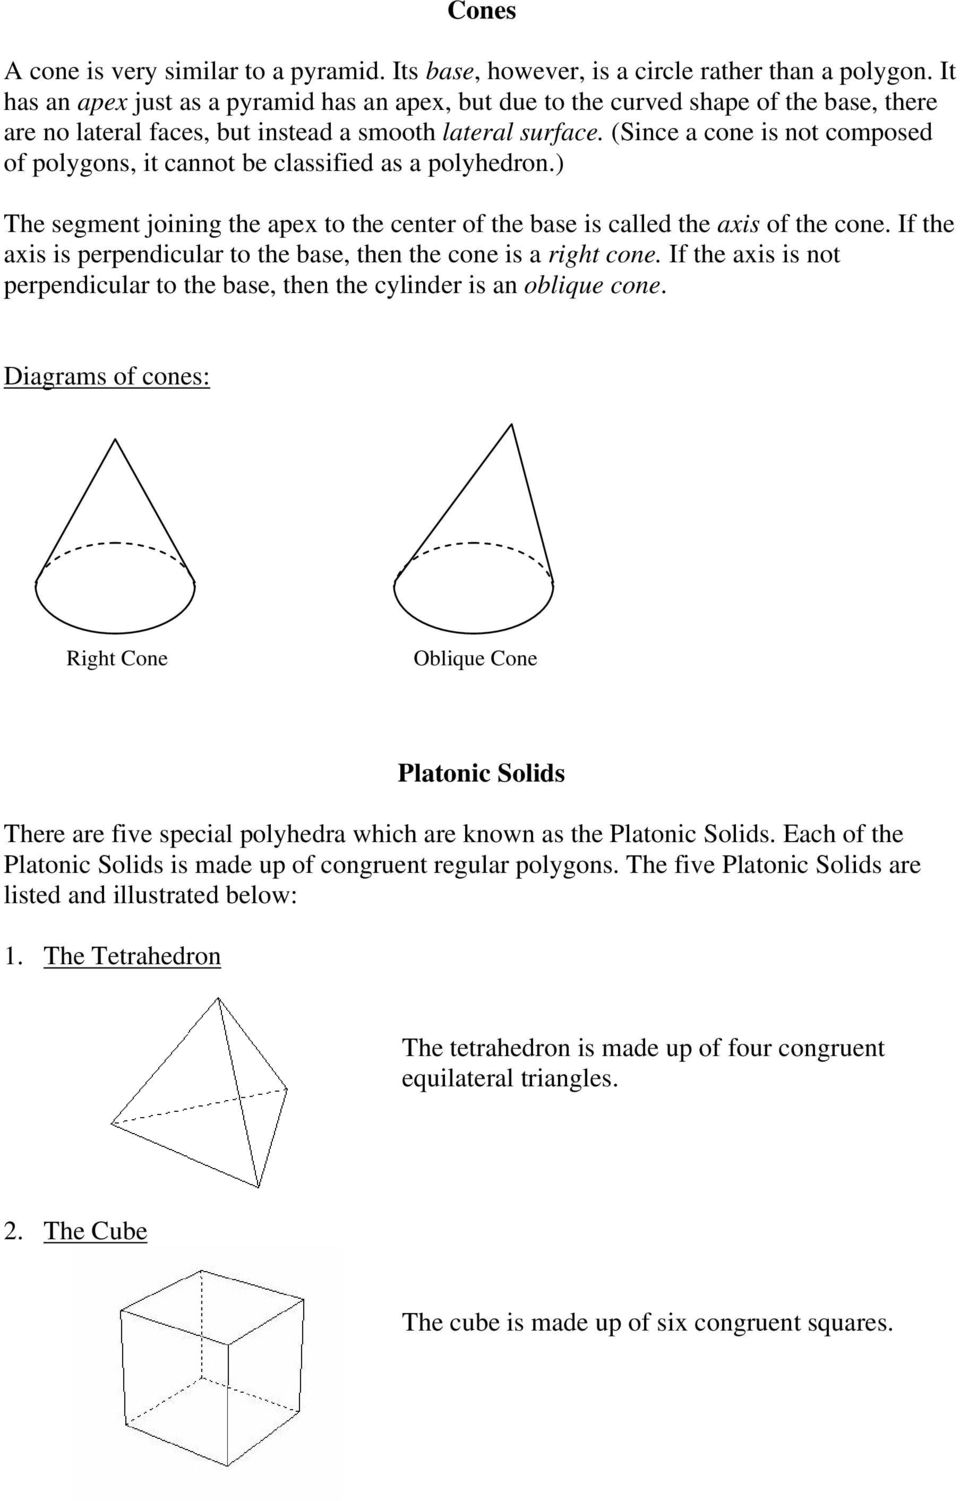 (Since a cone is not composed of polygons, it cannot be classified as a polyhedron.) The segment joining the apex to the center of the base is called the axis of the cone.